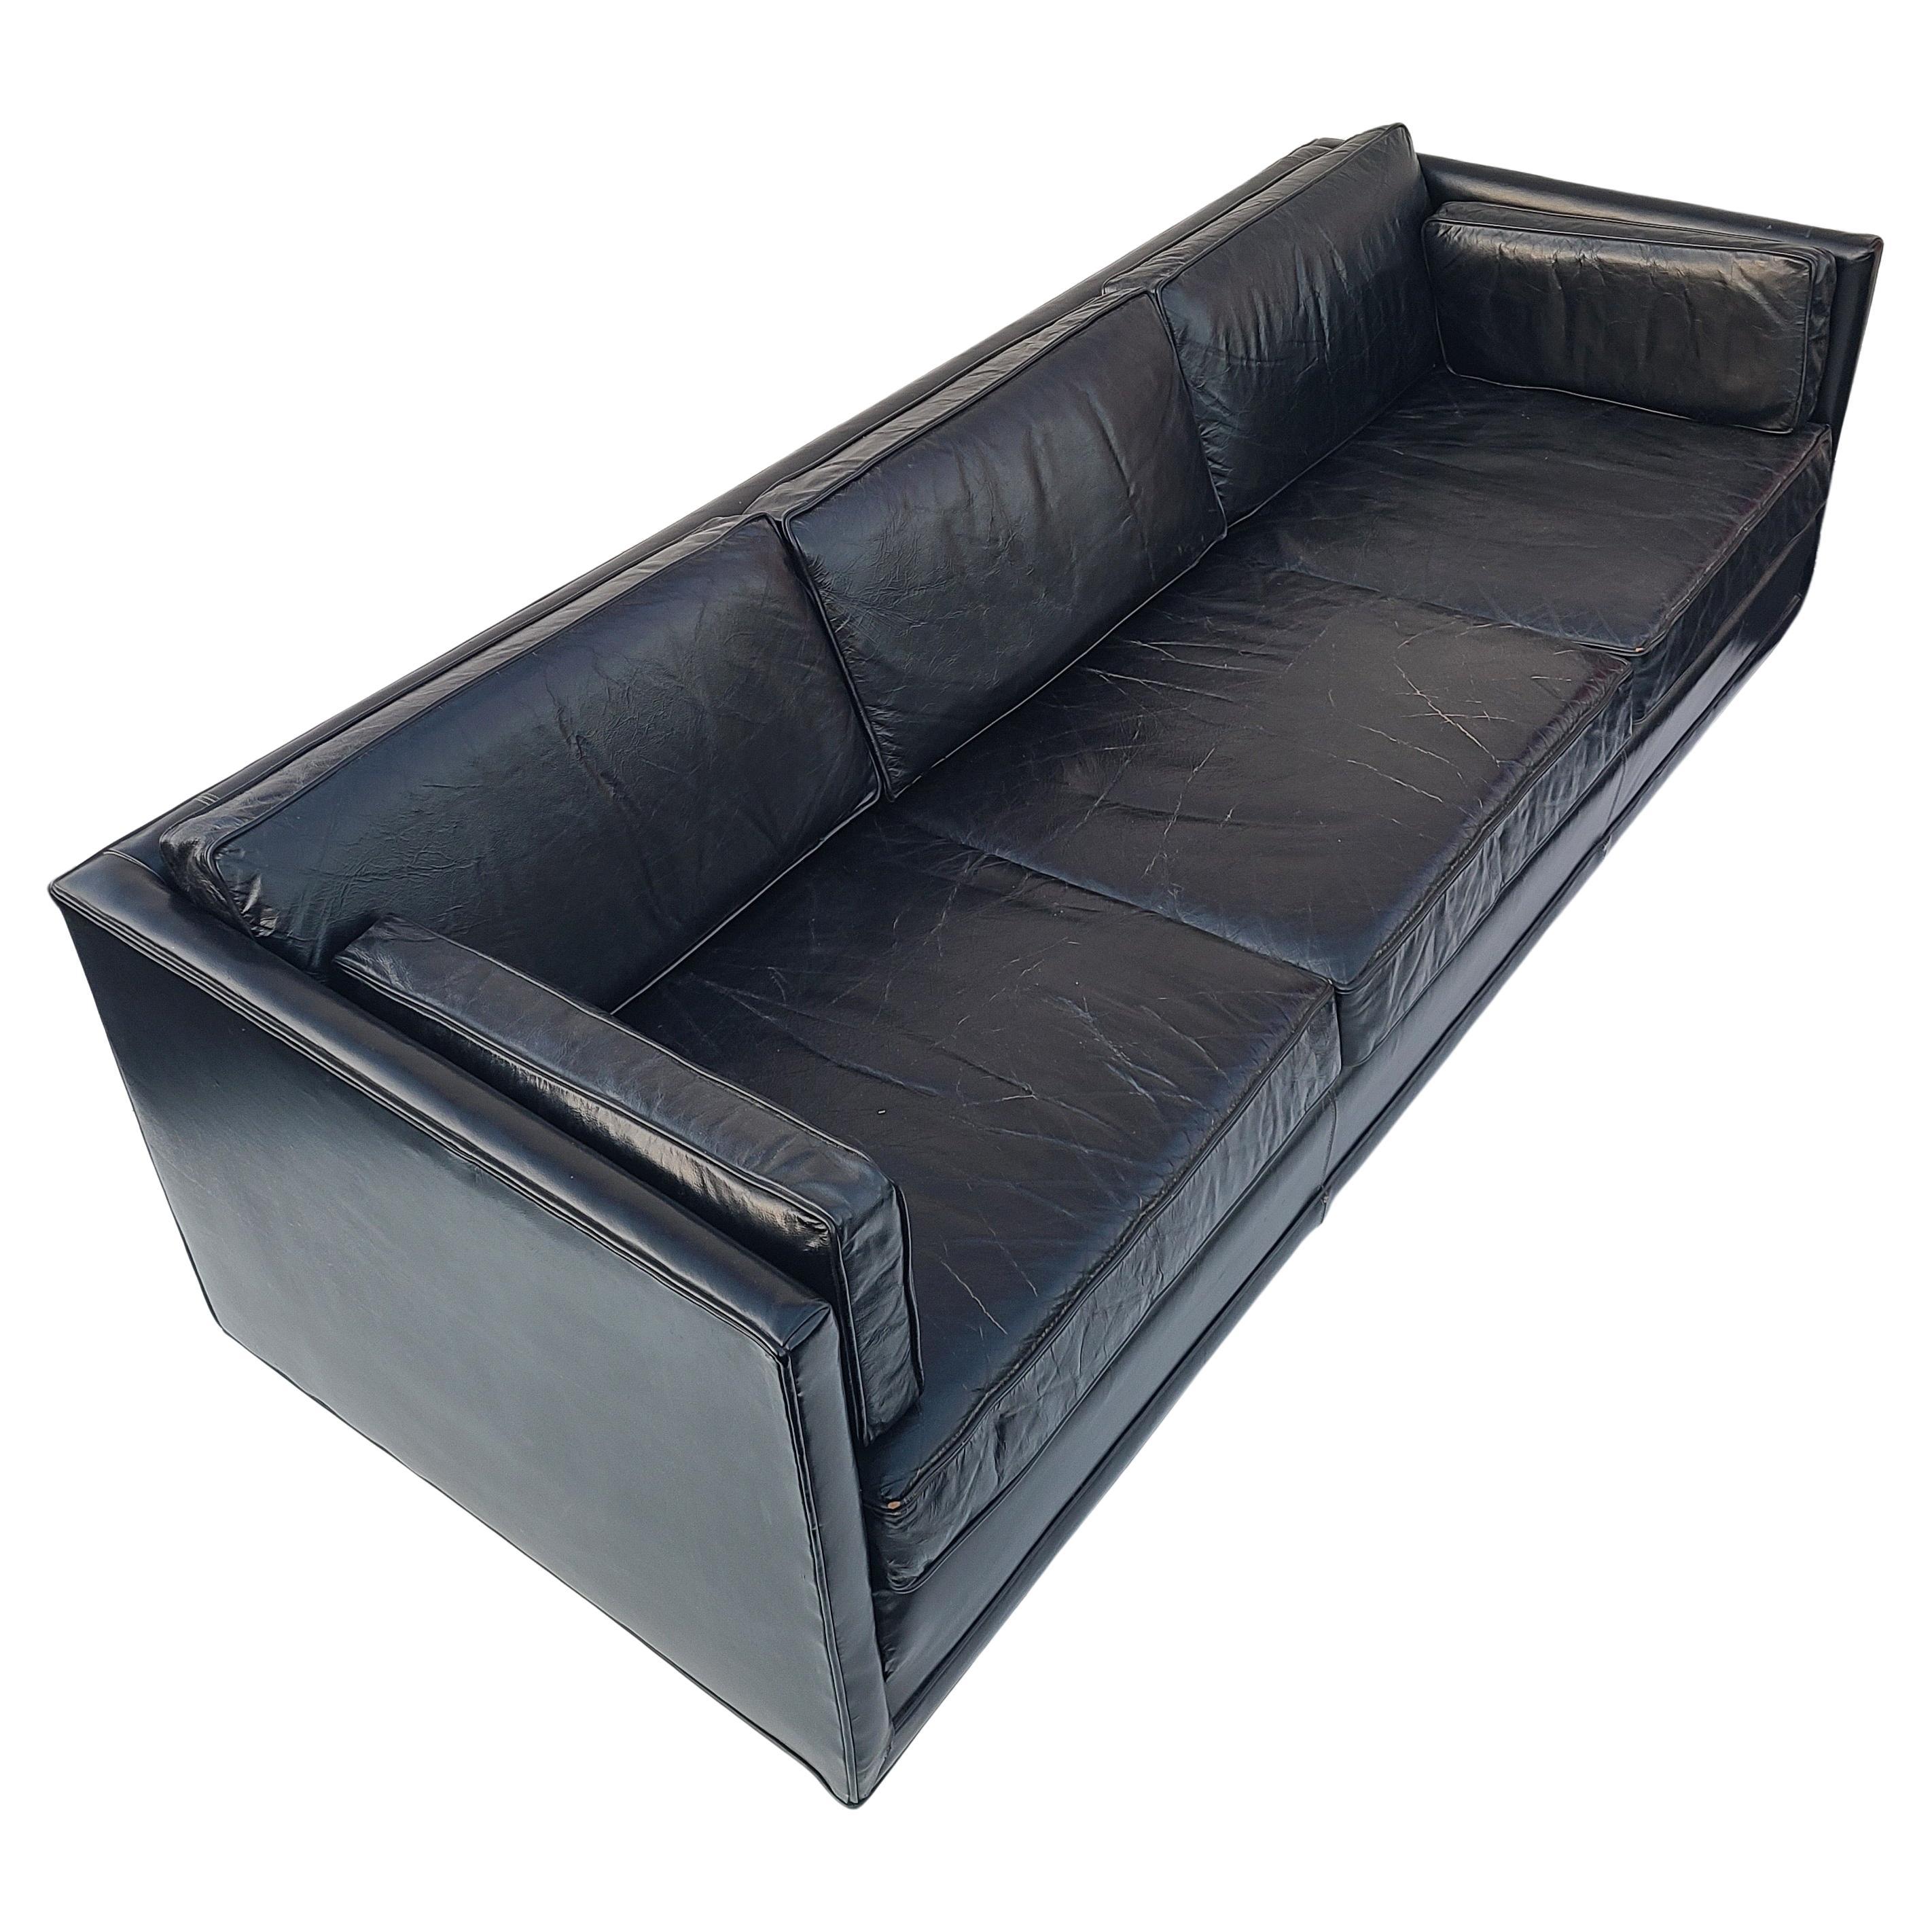 Black Leather Tuxedo Sofa by Charles Pfister for Knoll 2